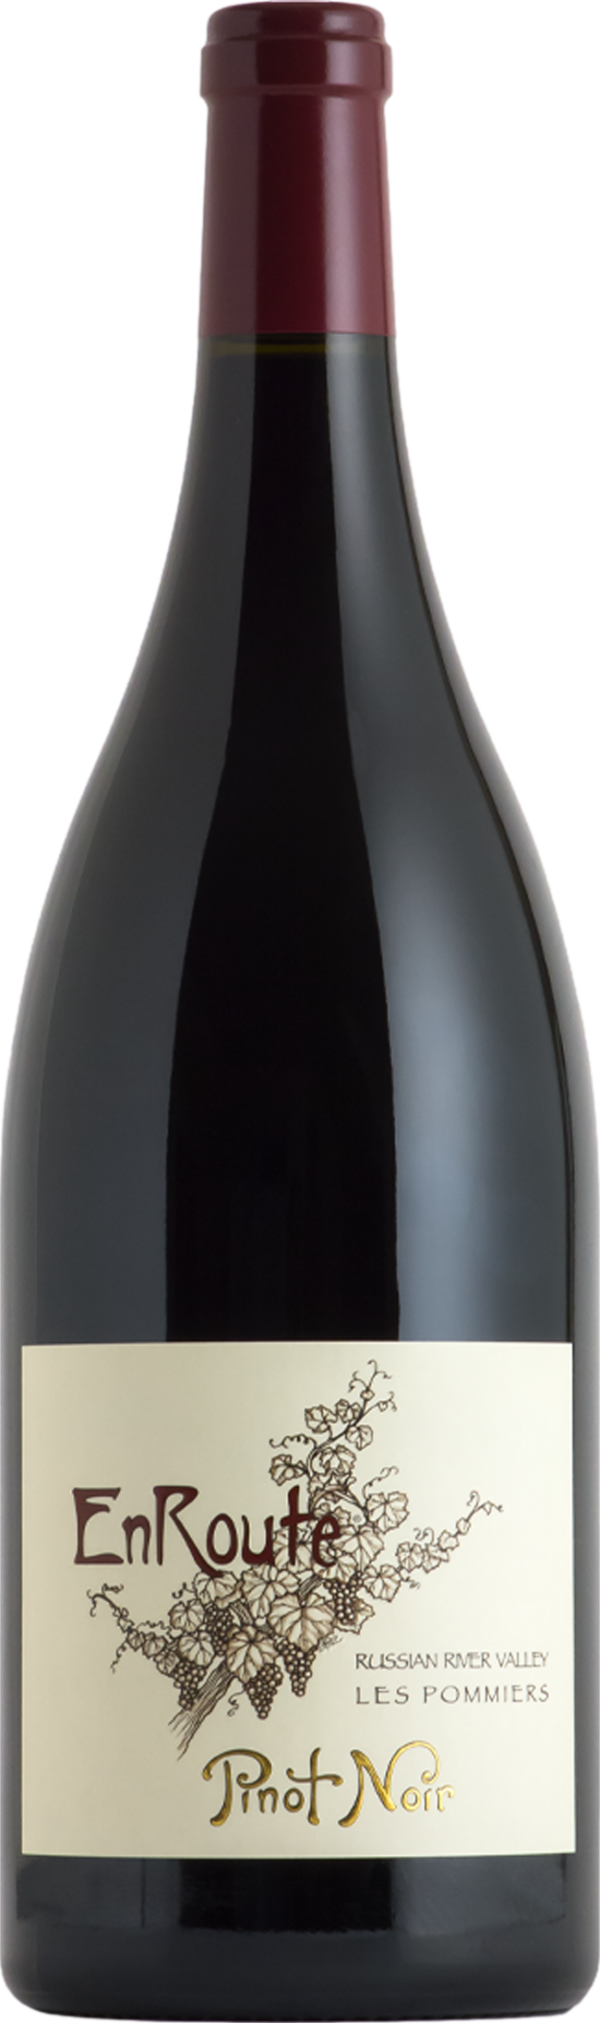 Product image of EnRoute Les Pommiers Pinot Noir 2019 from 8wines